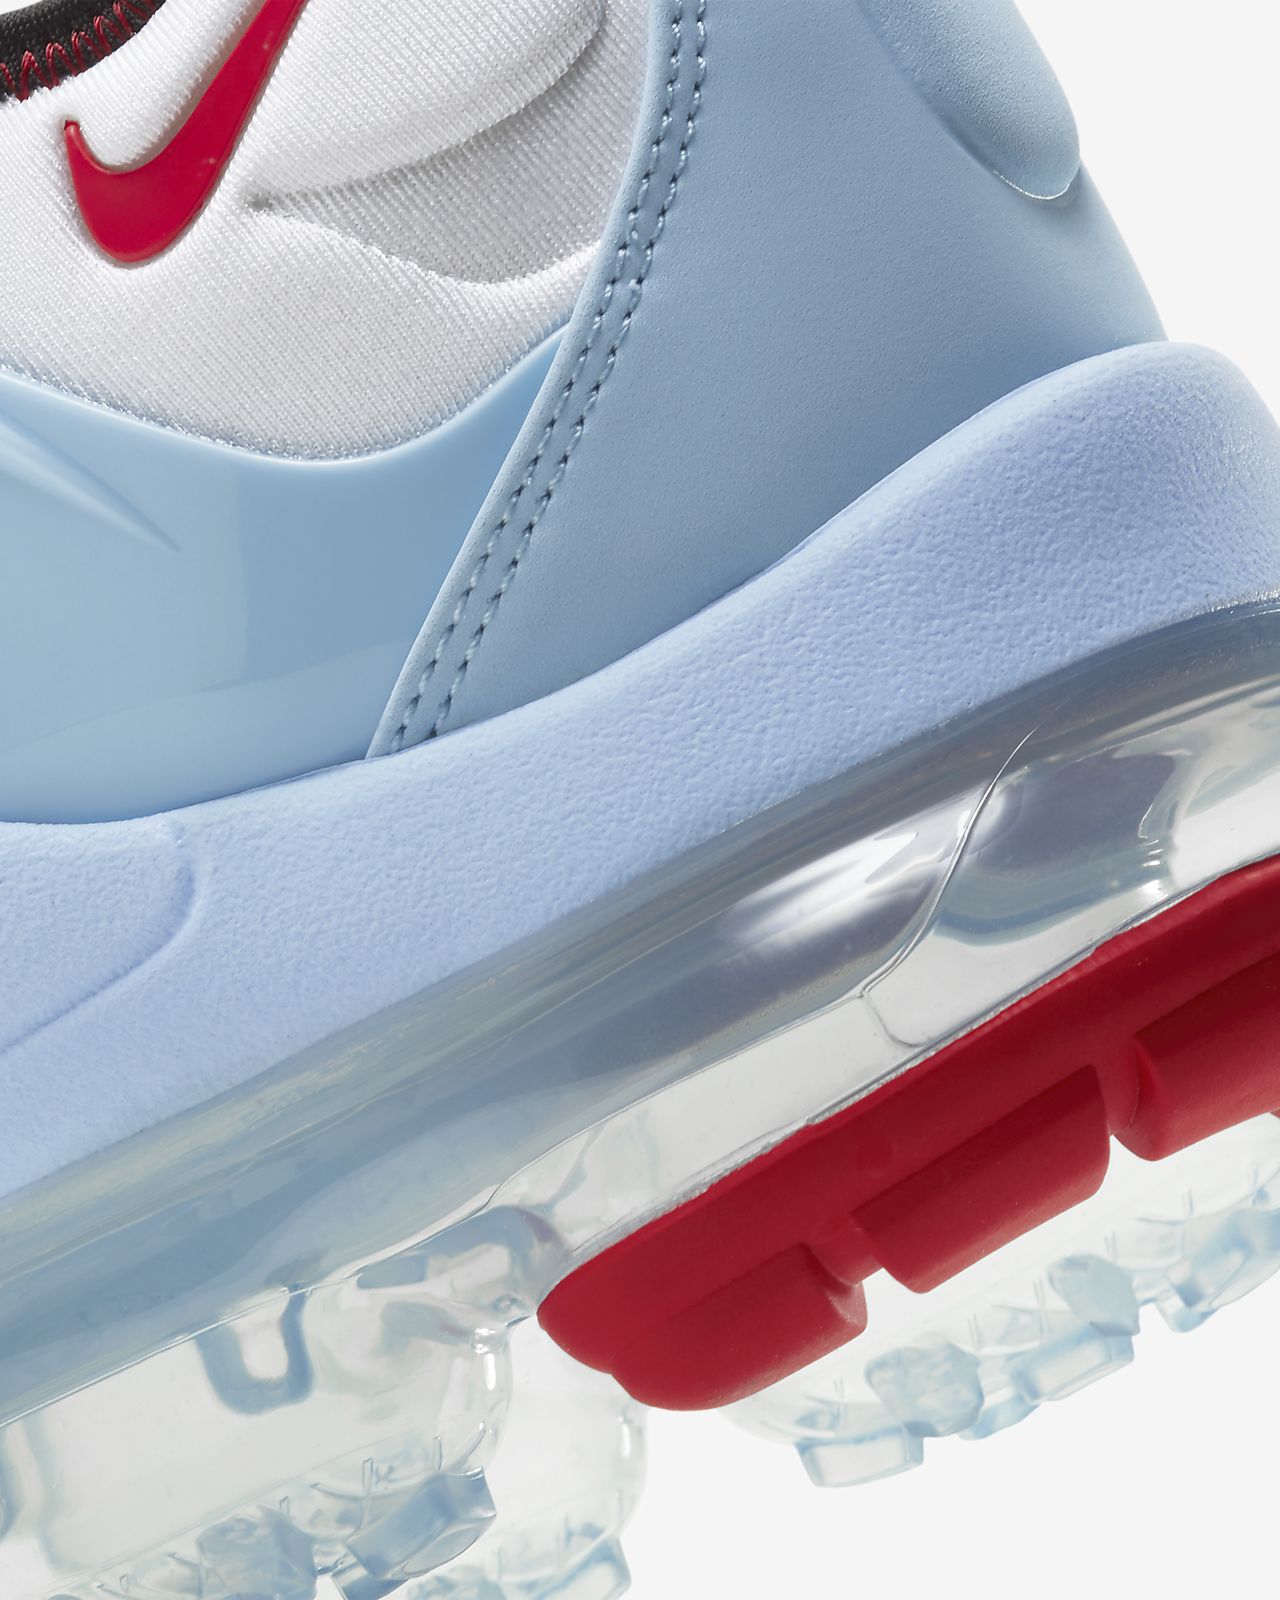 Nike vapormax plus white Buy Sale without cher